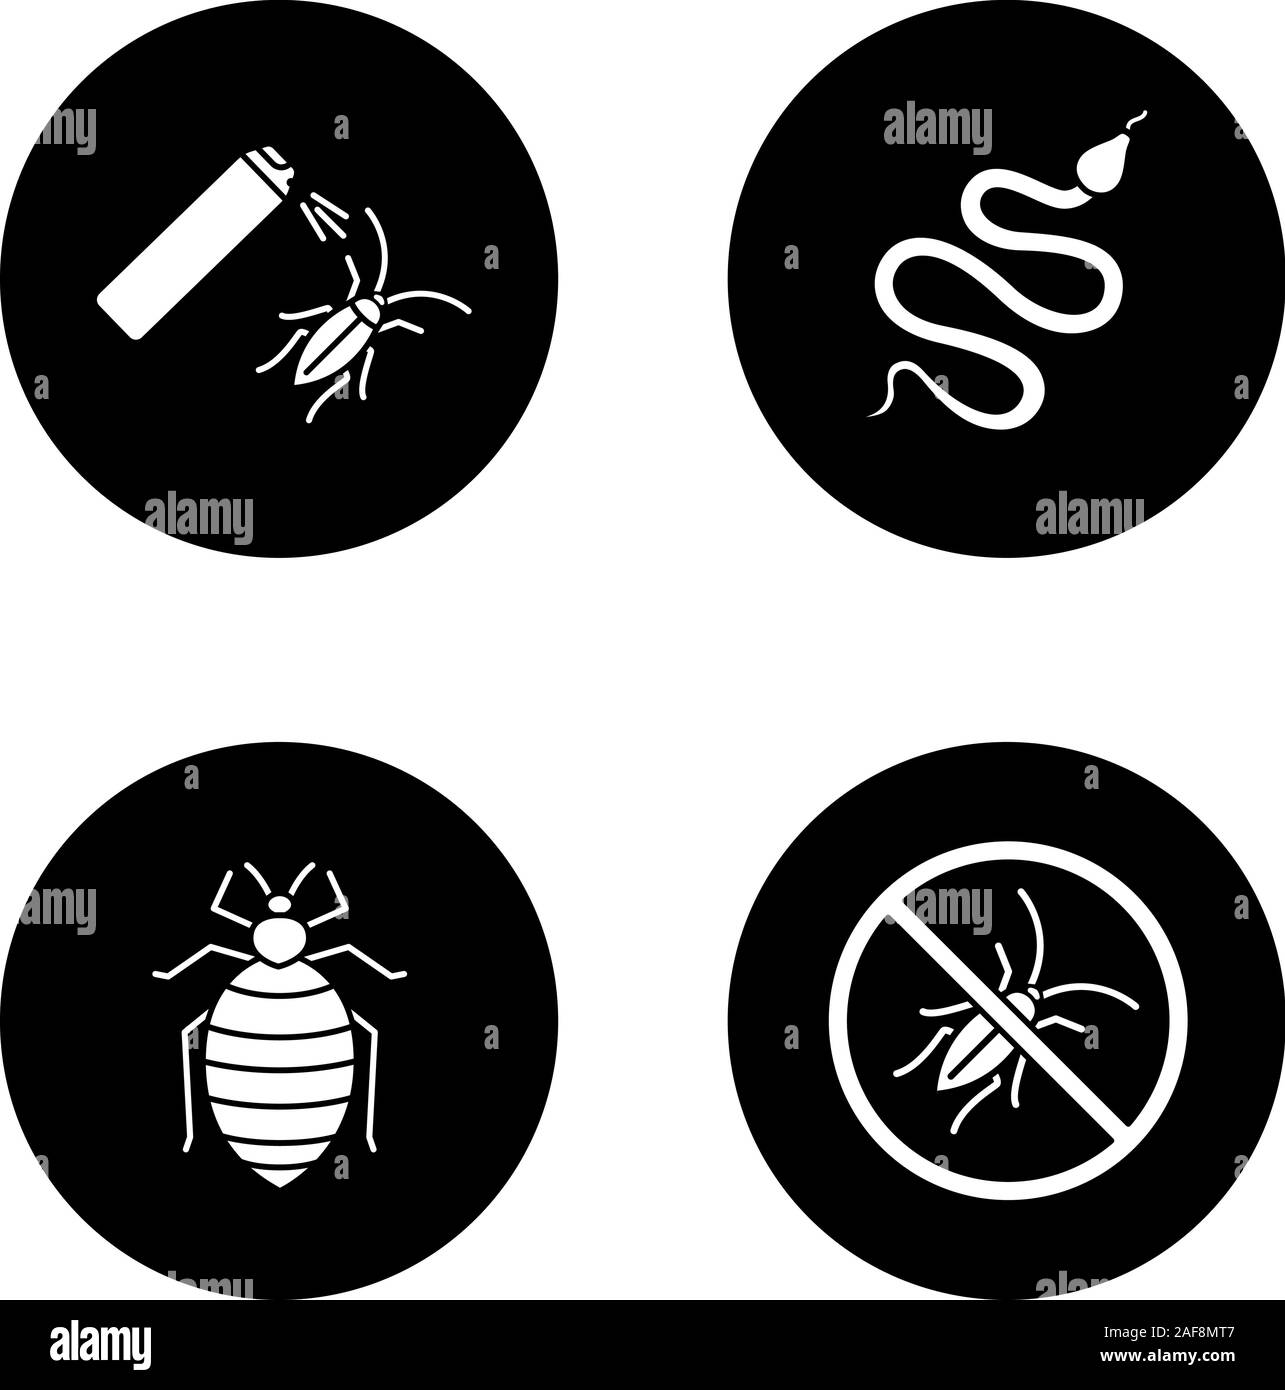 Pest control glyph icons set. Snake, bed bug, cockroach bait, stop roaches. Vector white silhouettes illustrations in black circles Stock Vector